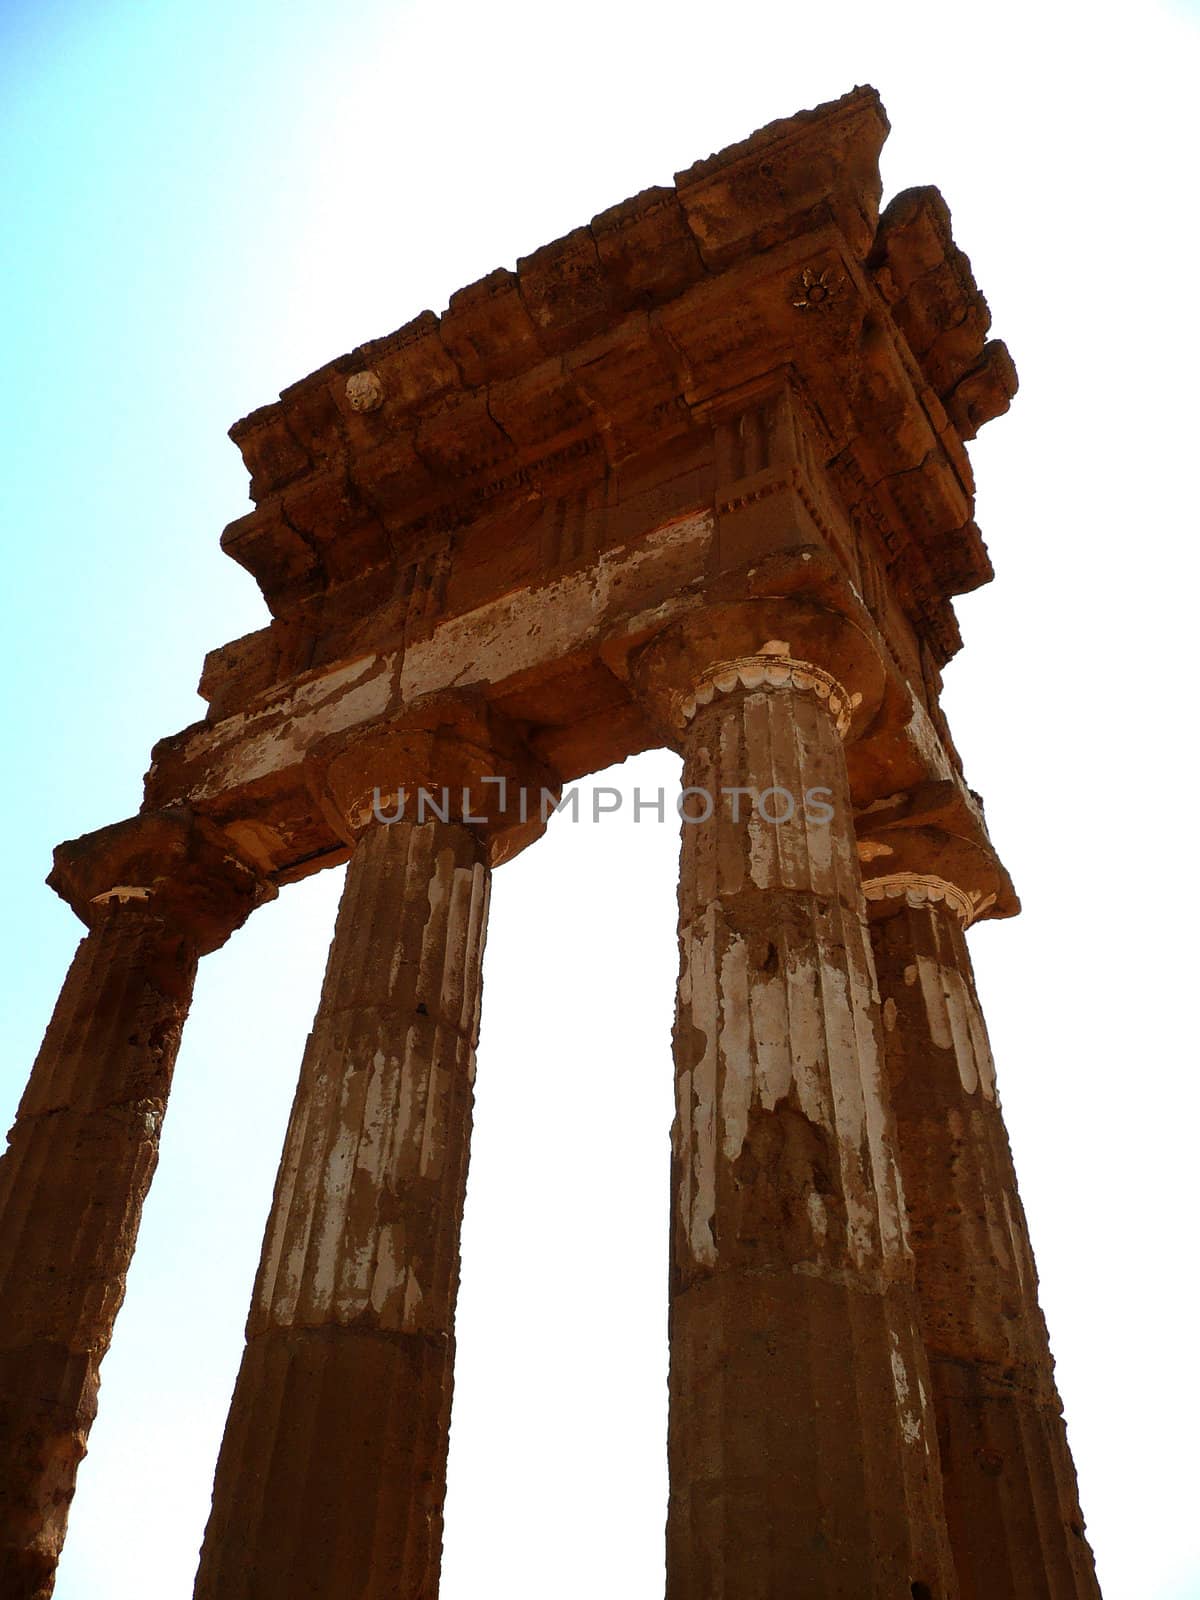 Temple of Castor and Pollux, Agrigento, Italy